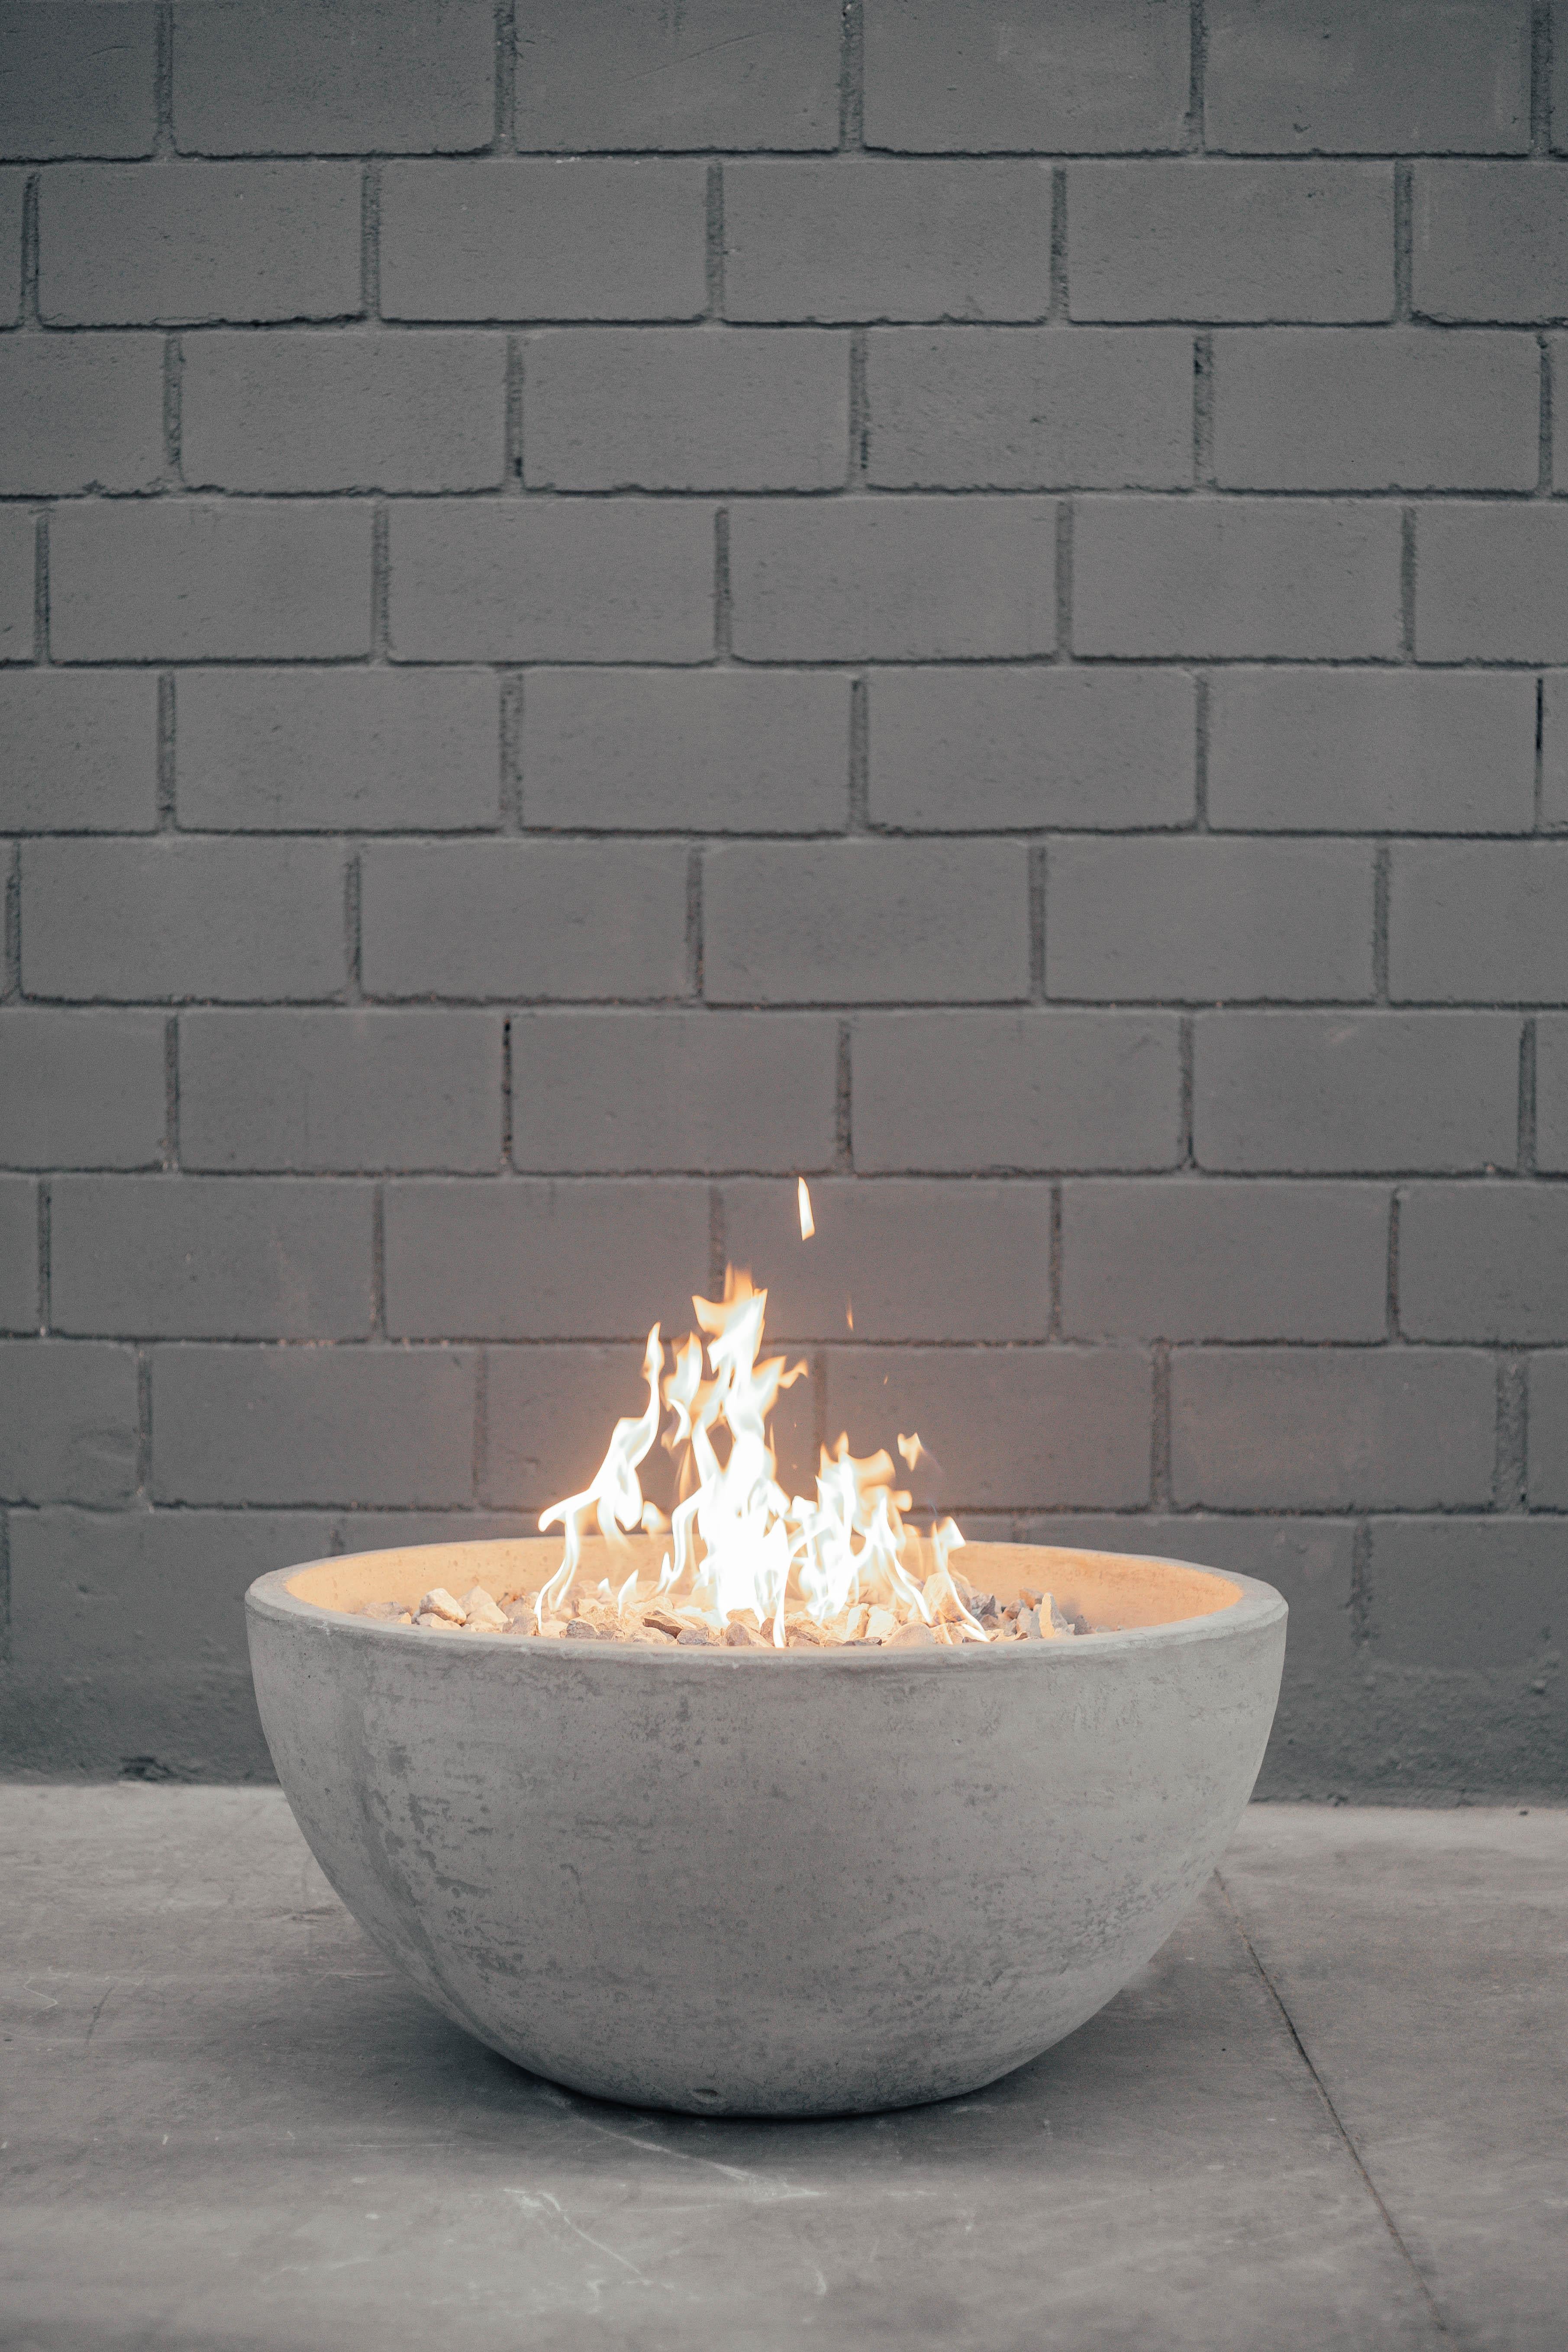 Jolla uno fire bowl by Andres Monnier.
Dimensions: diameter 90cm x height 45cm.
Materials: stainless steel. Concrete. 
Technique: polished stainless steel. Polished concrete. 

The design of the Concretus Collection handmade concrete pieces.